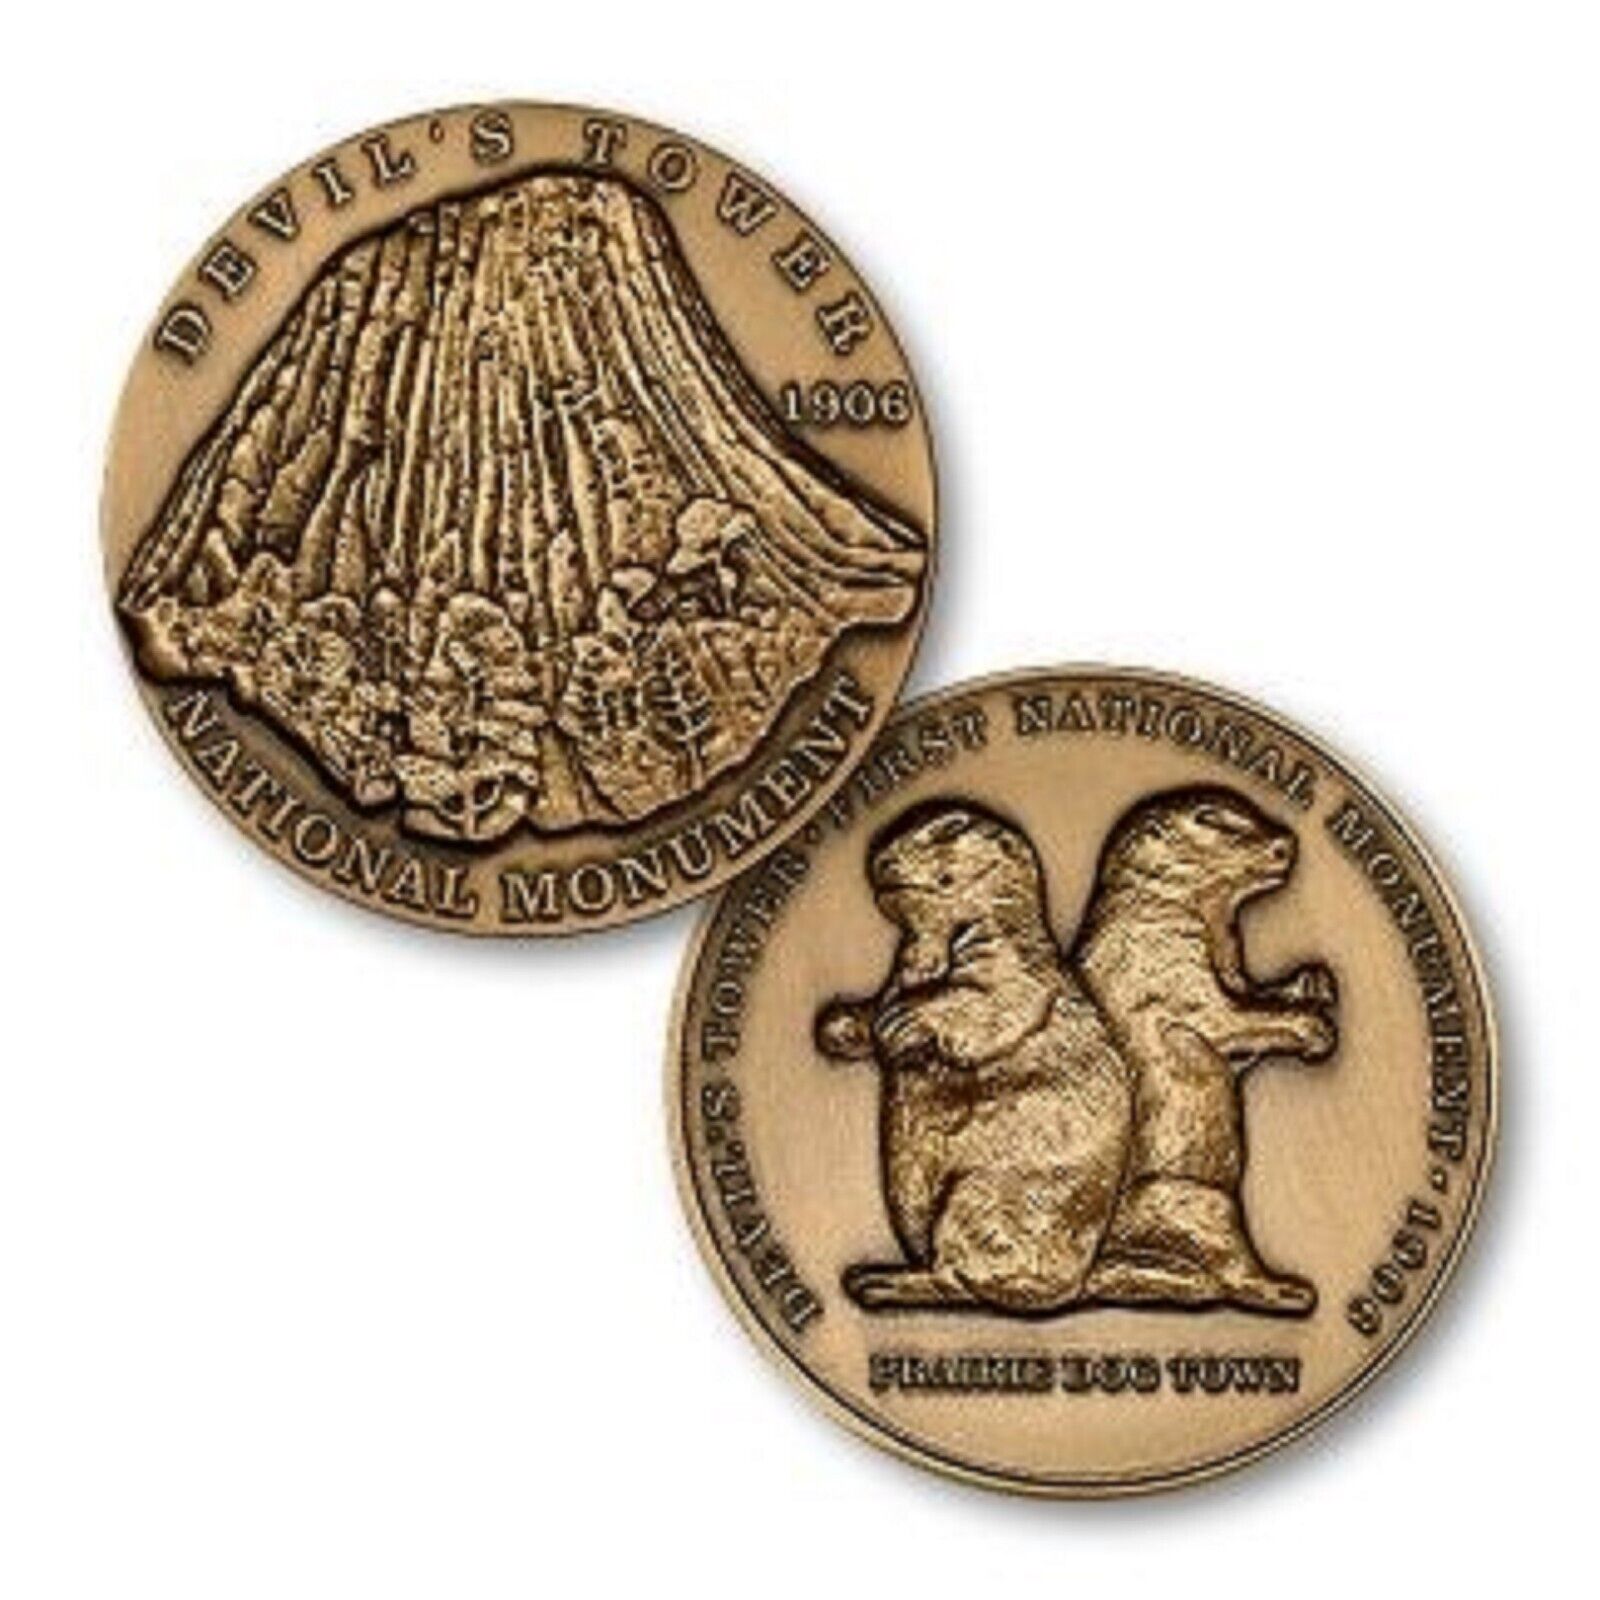 DEVIL'S TOWER NATIONAL MONUMENT BRONZE  CHALLENGE COIN